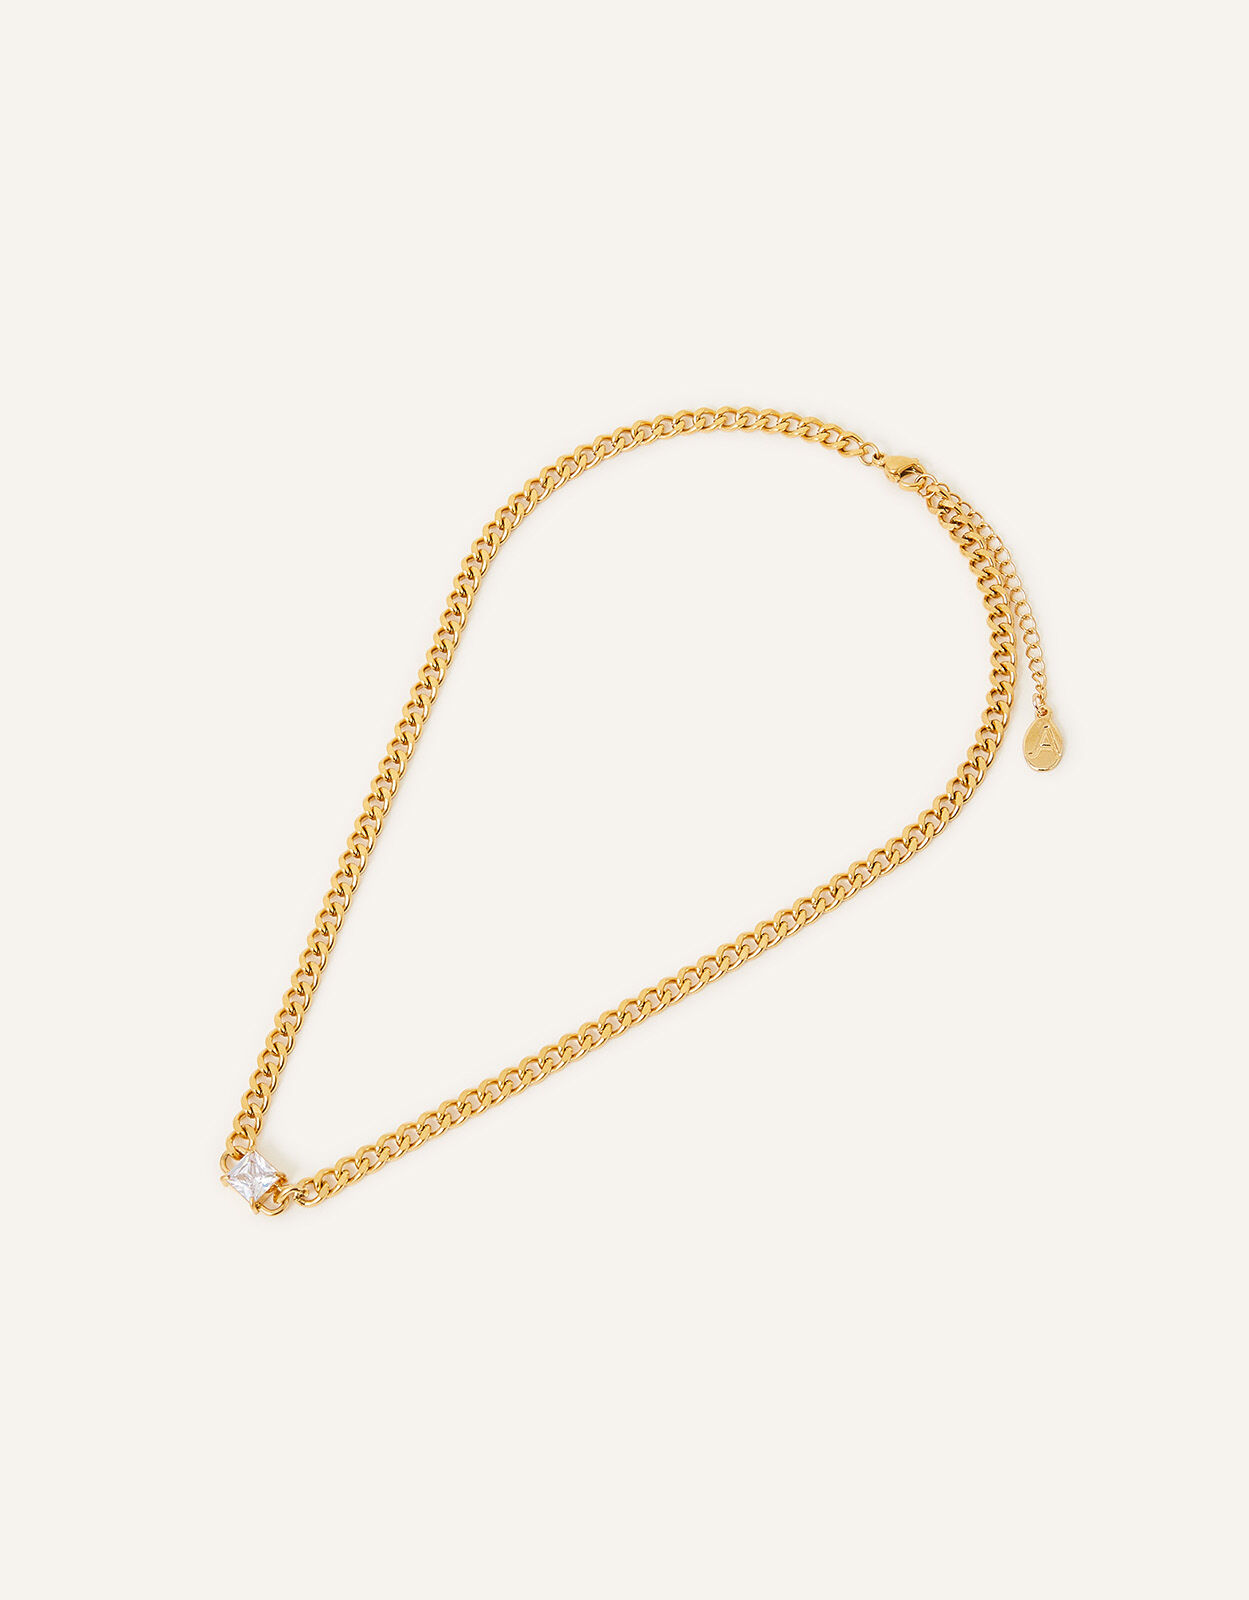 Gold Plated Statement Necklace Bohemian Chunky Statement Necklaces Long  Chain Uk Trend Coin Pendant Three Layer Necklace From Cecmic, $2.02 |  DHgate.Com